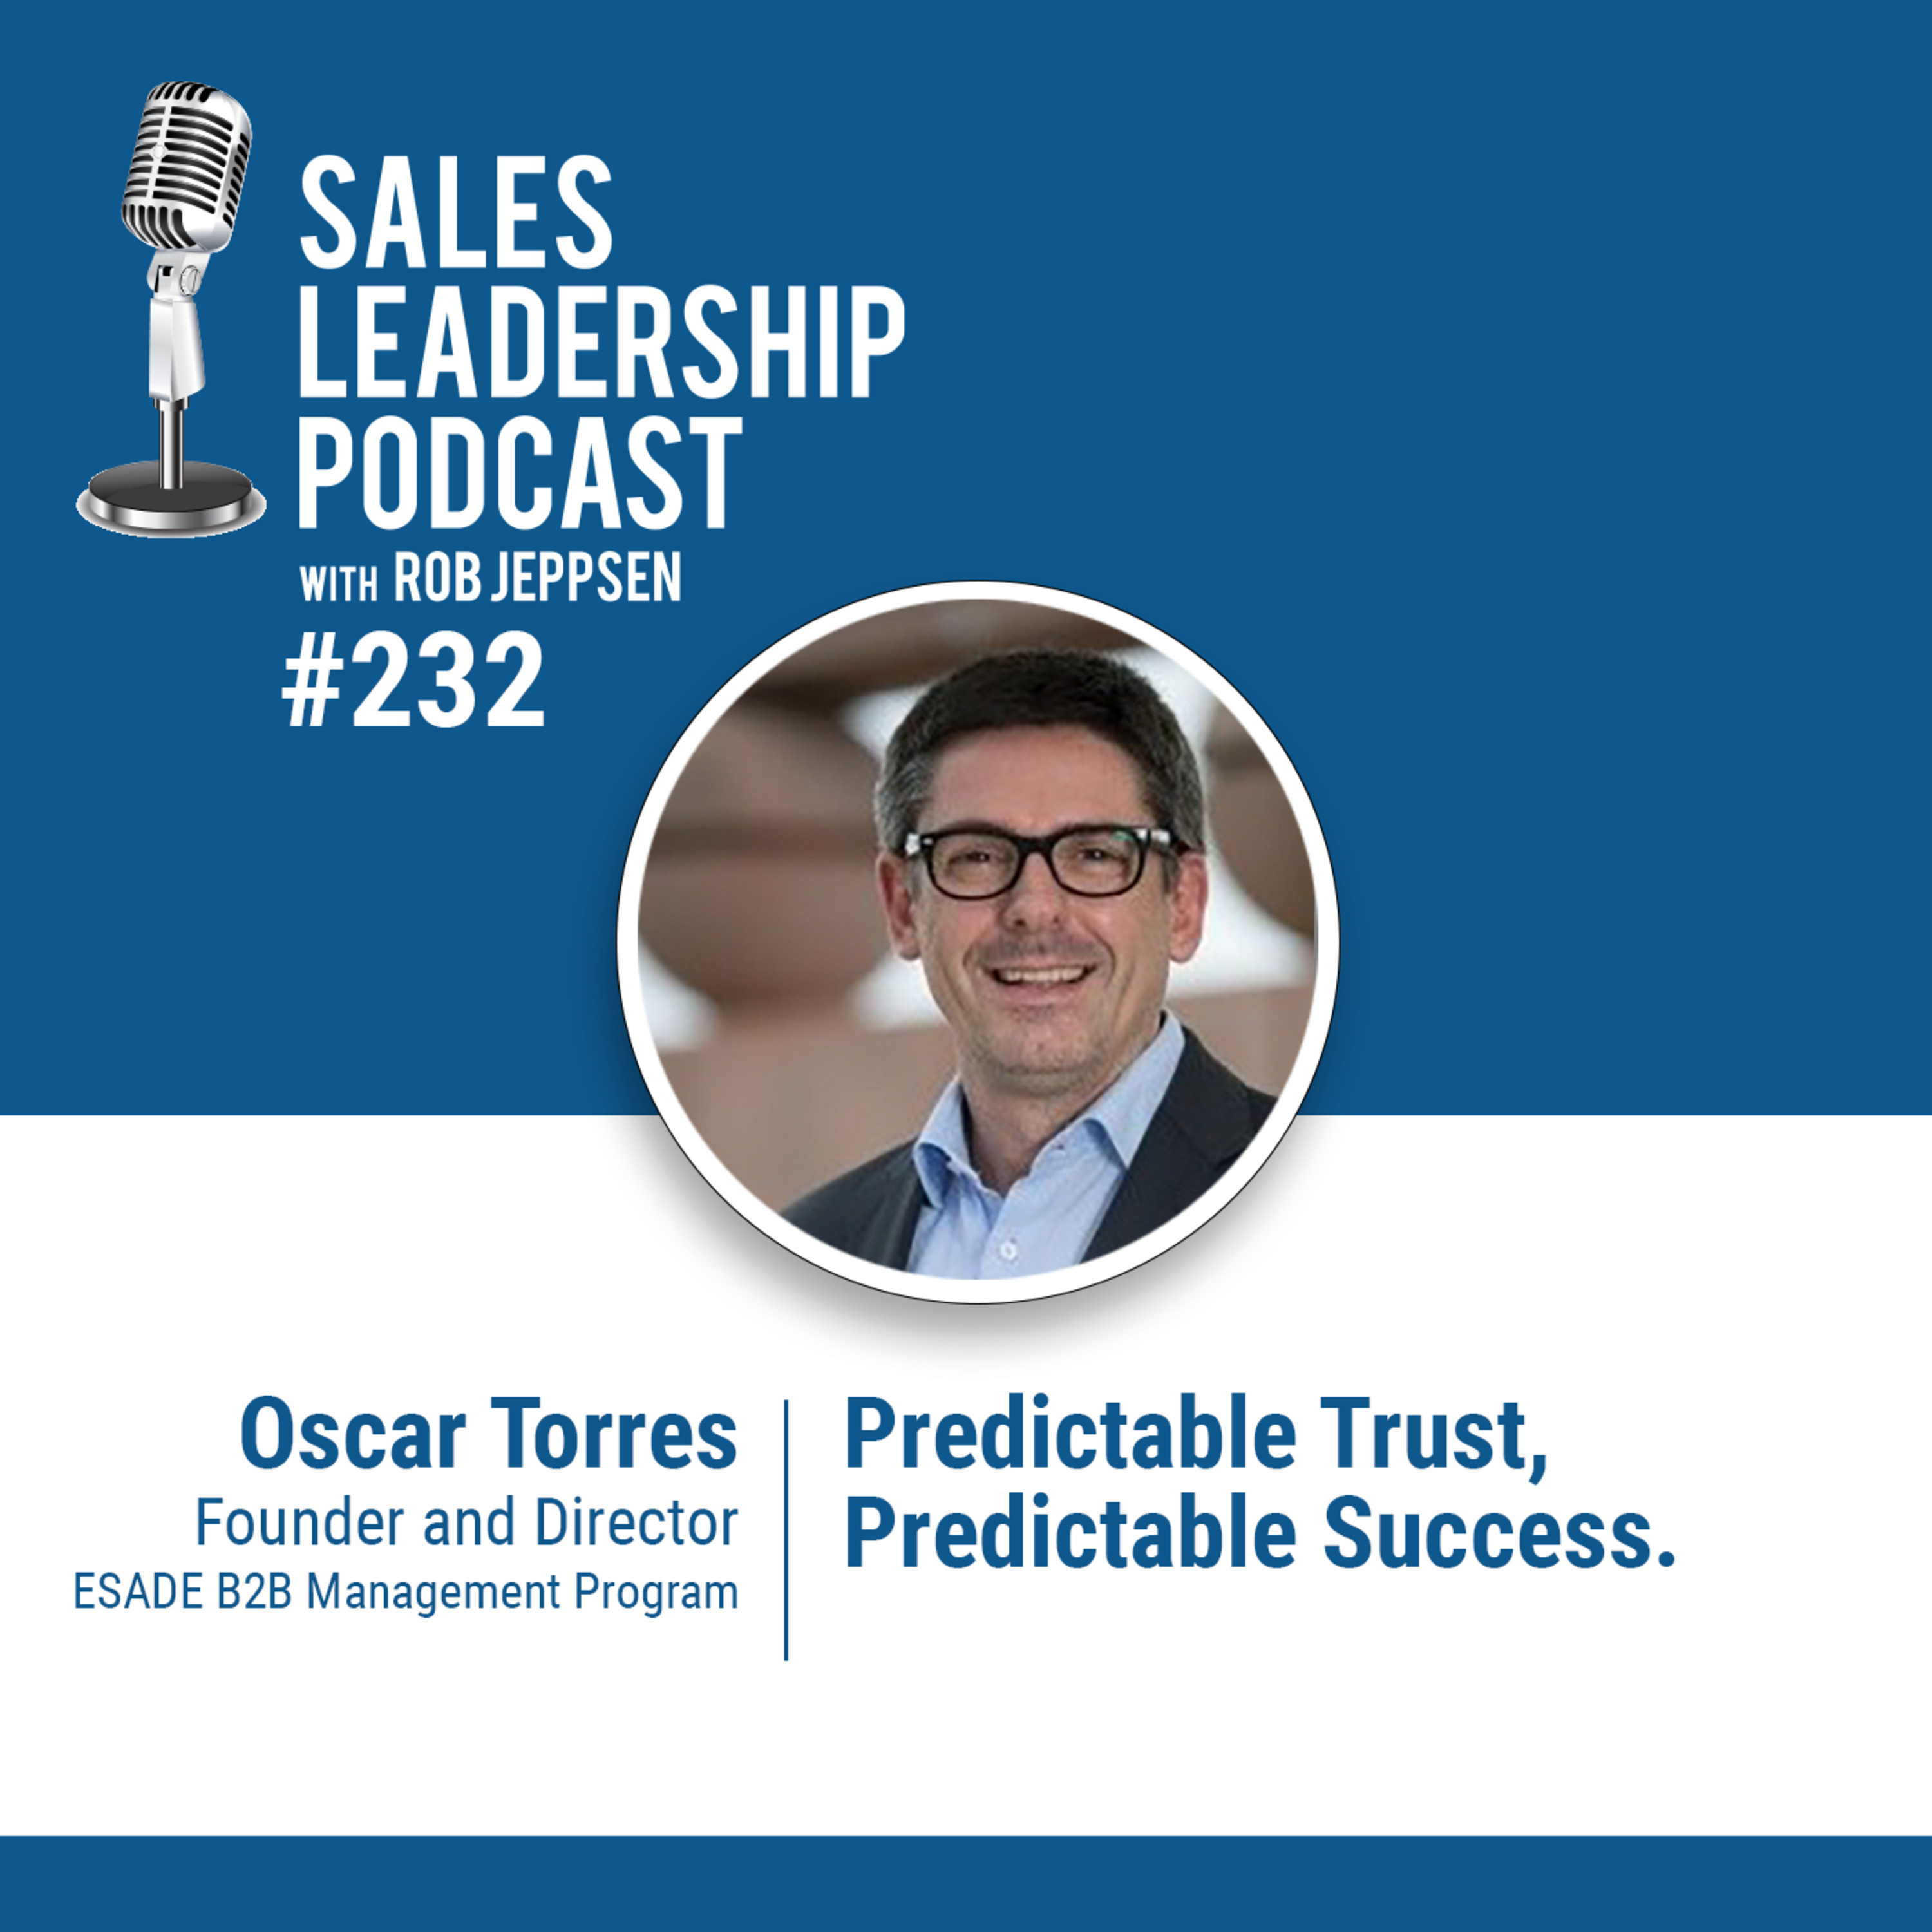 Episode 233: Oscar Torres, Global Sr. Director of Channel and Sales Transformation at Dassault Systems - Predictable Trust, Predictable Success.